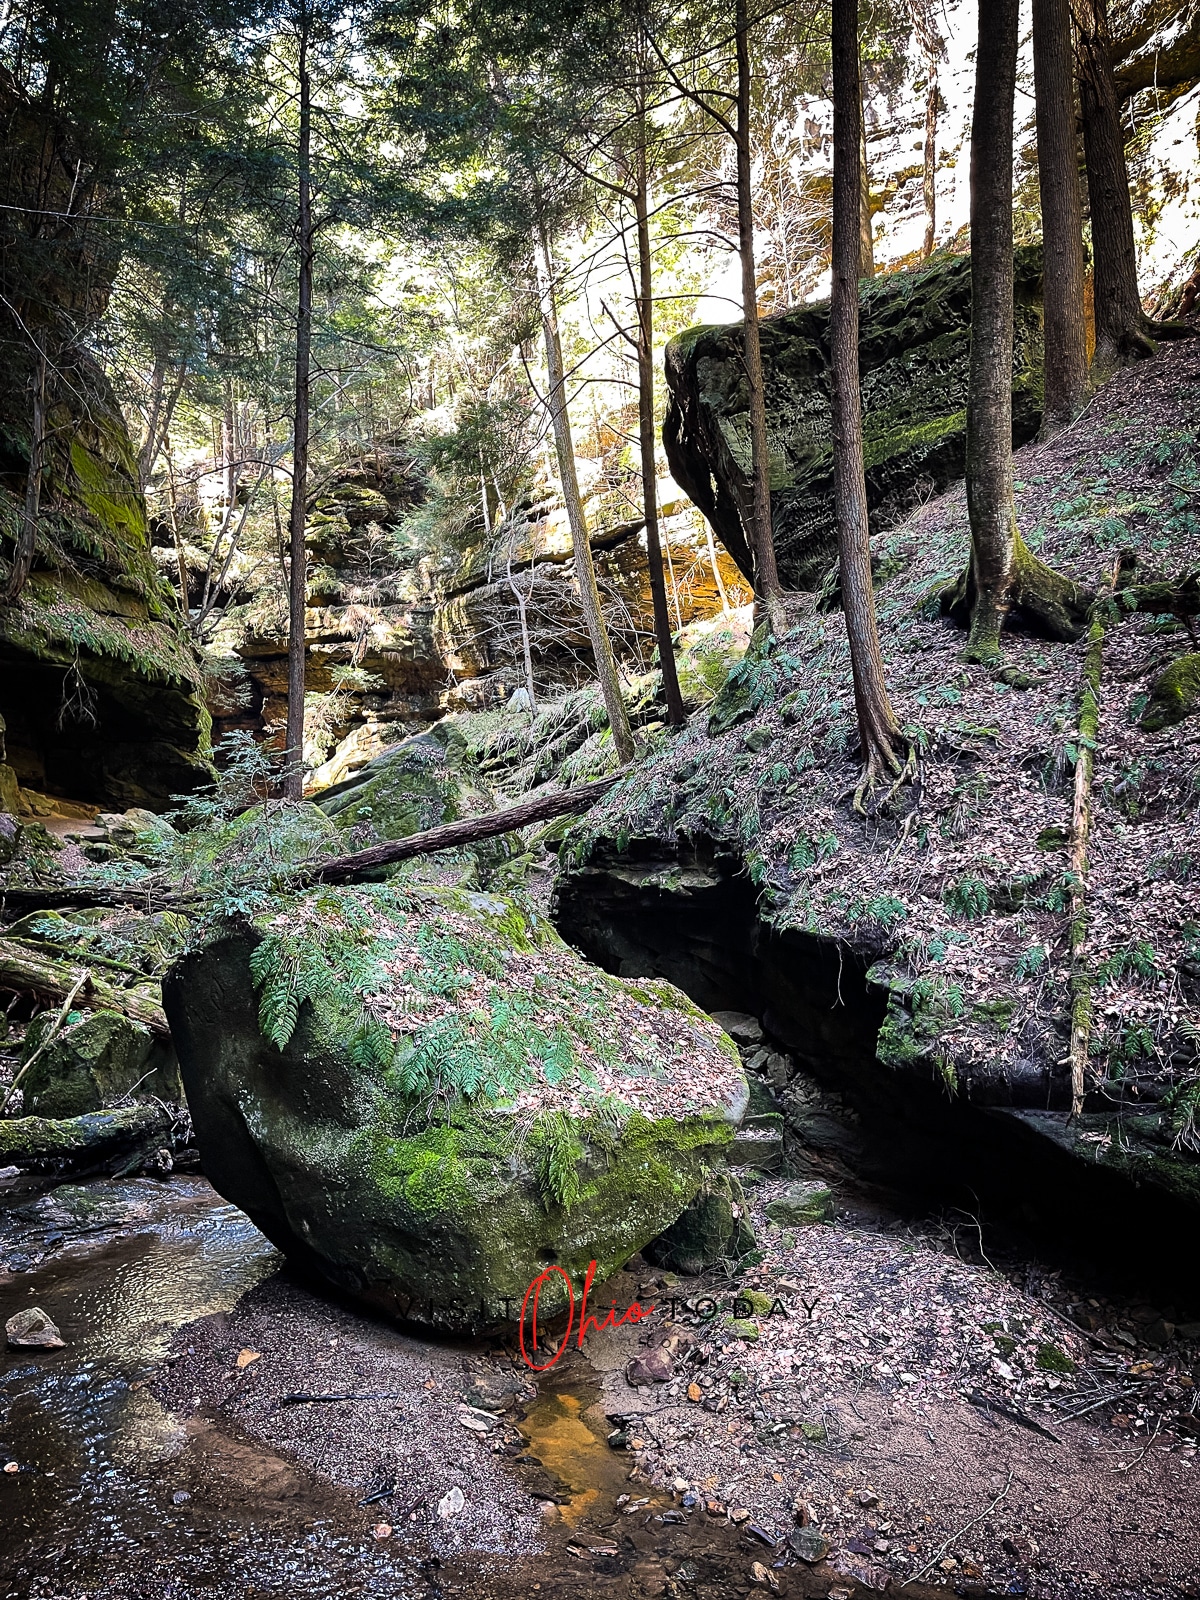 rocky gorge of conkles hollow with skinny trees